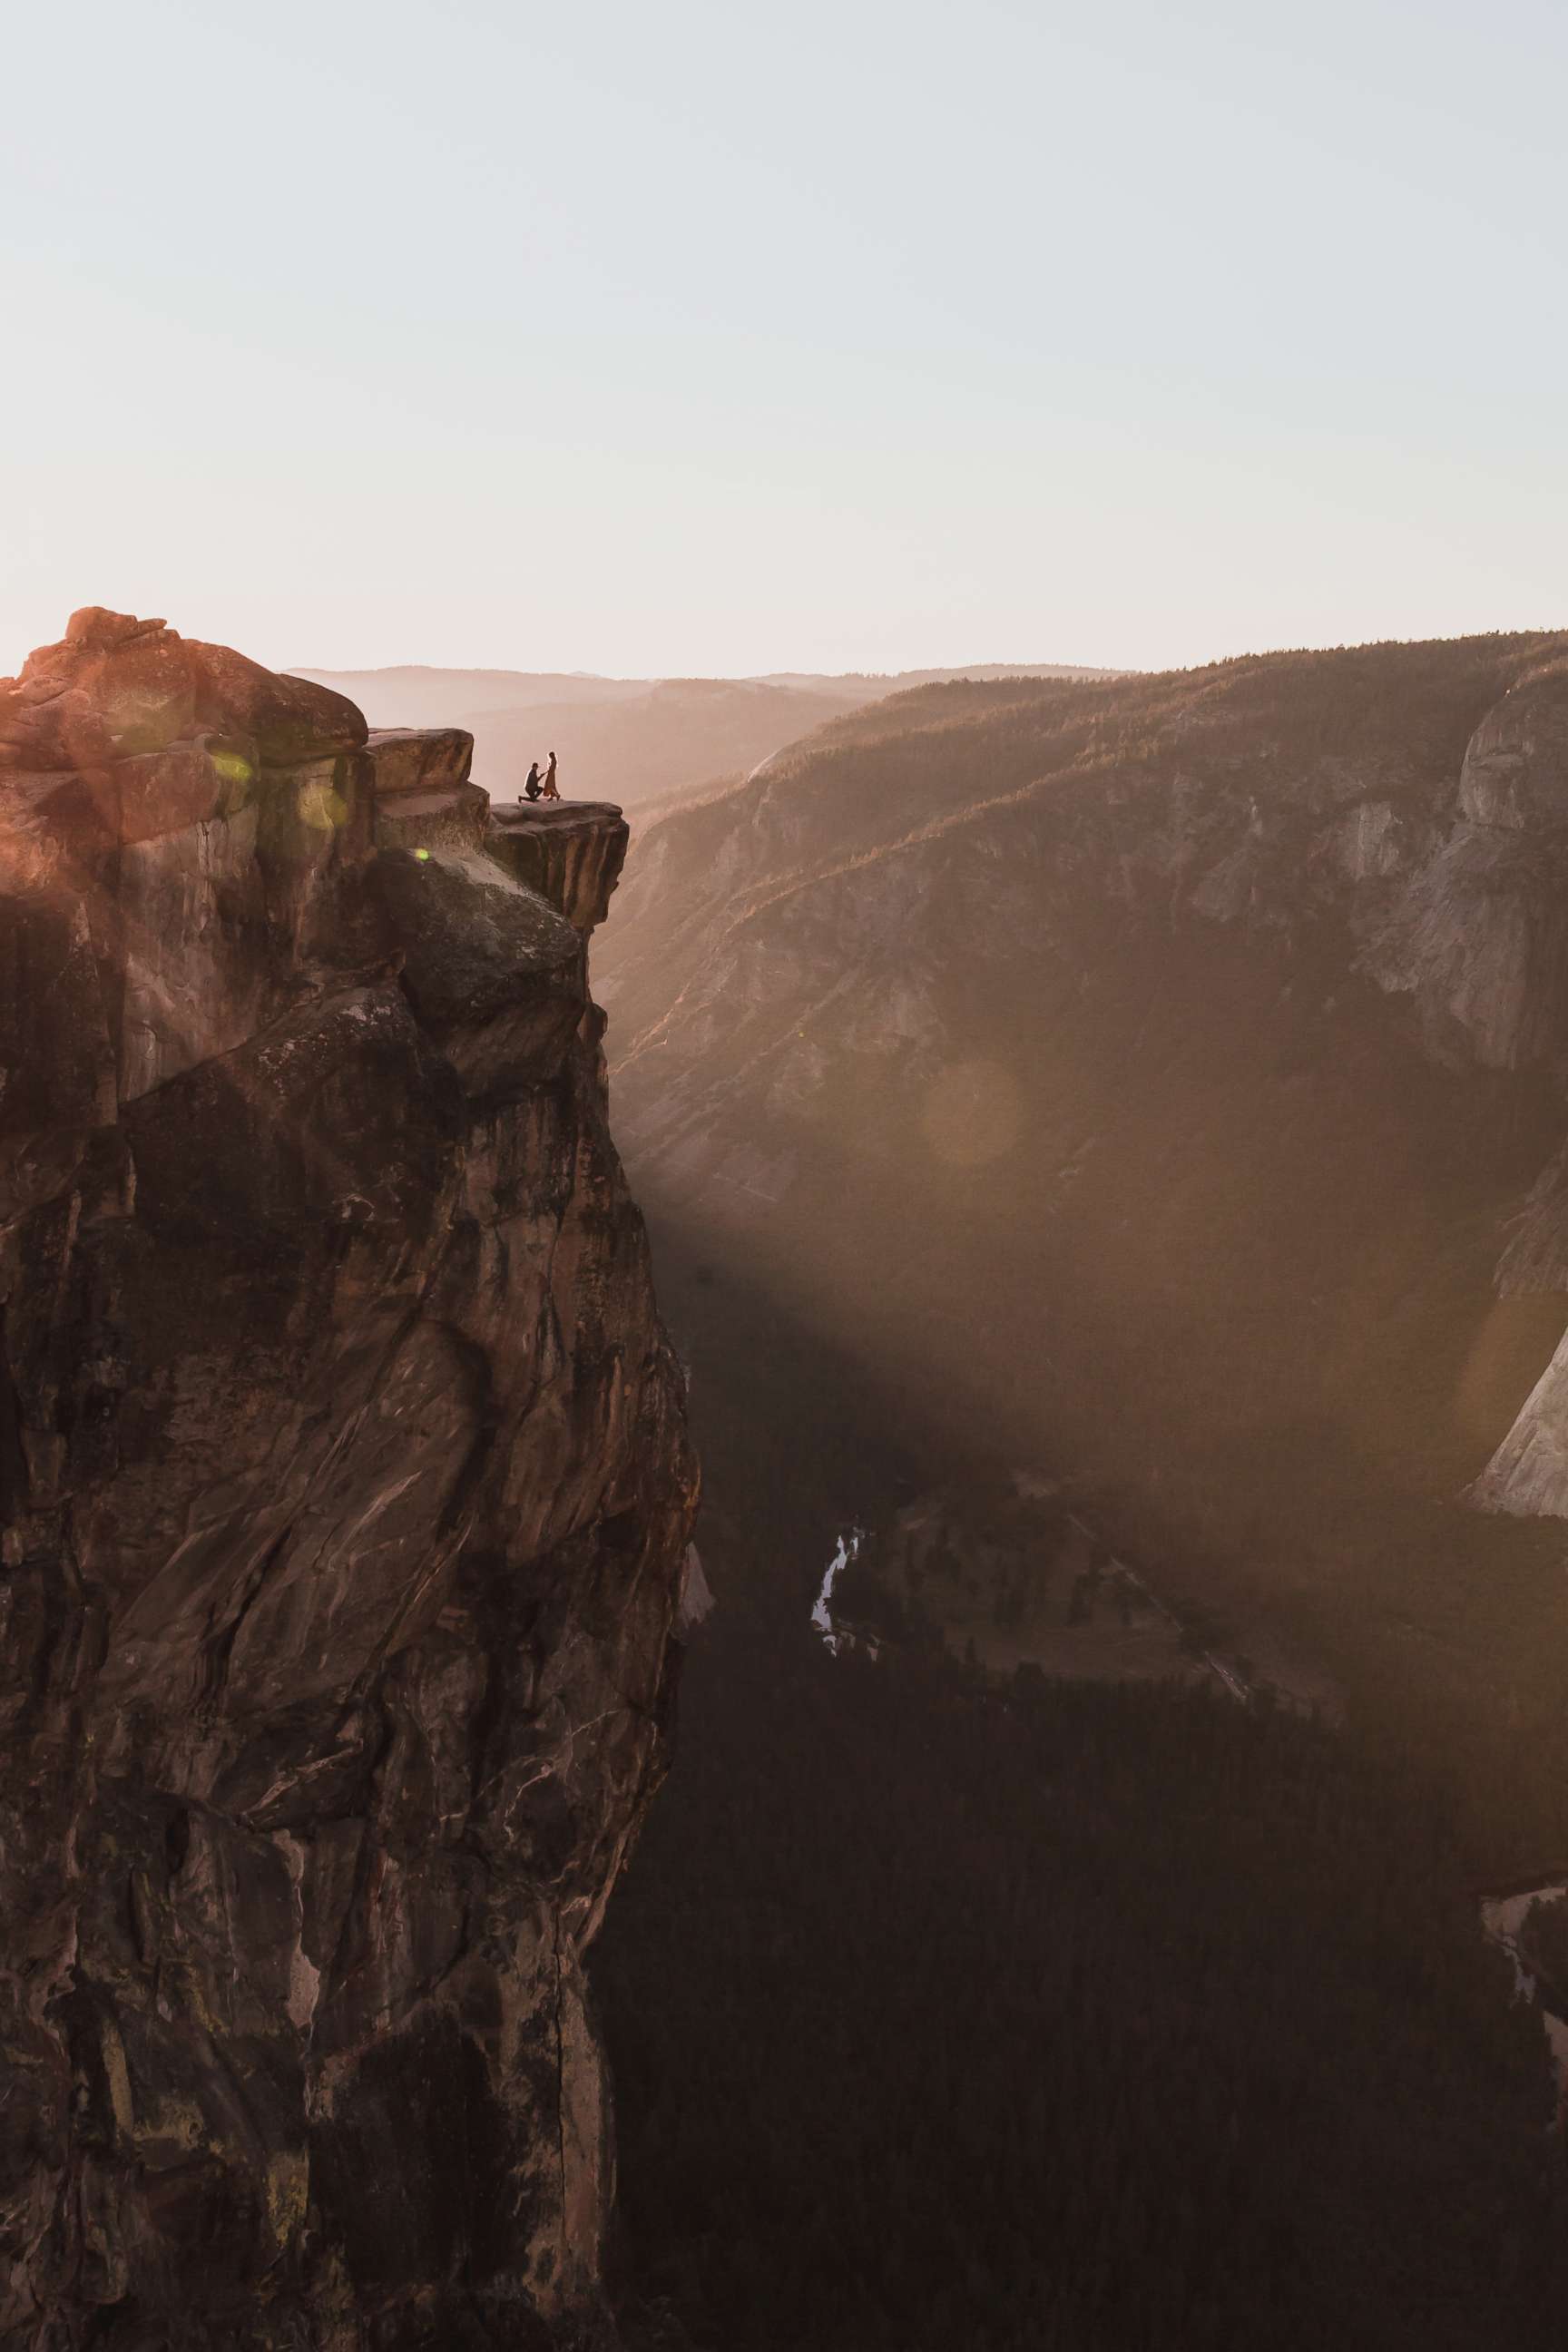 PHOTO: Photographer Matthew Dippel shared a stunning image of a couple's proposal at Taft Point in Yosemite National Park. October 28, 2018